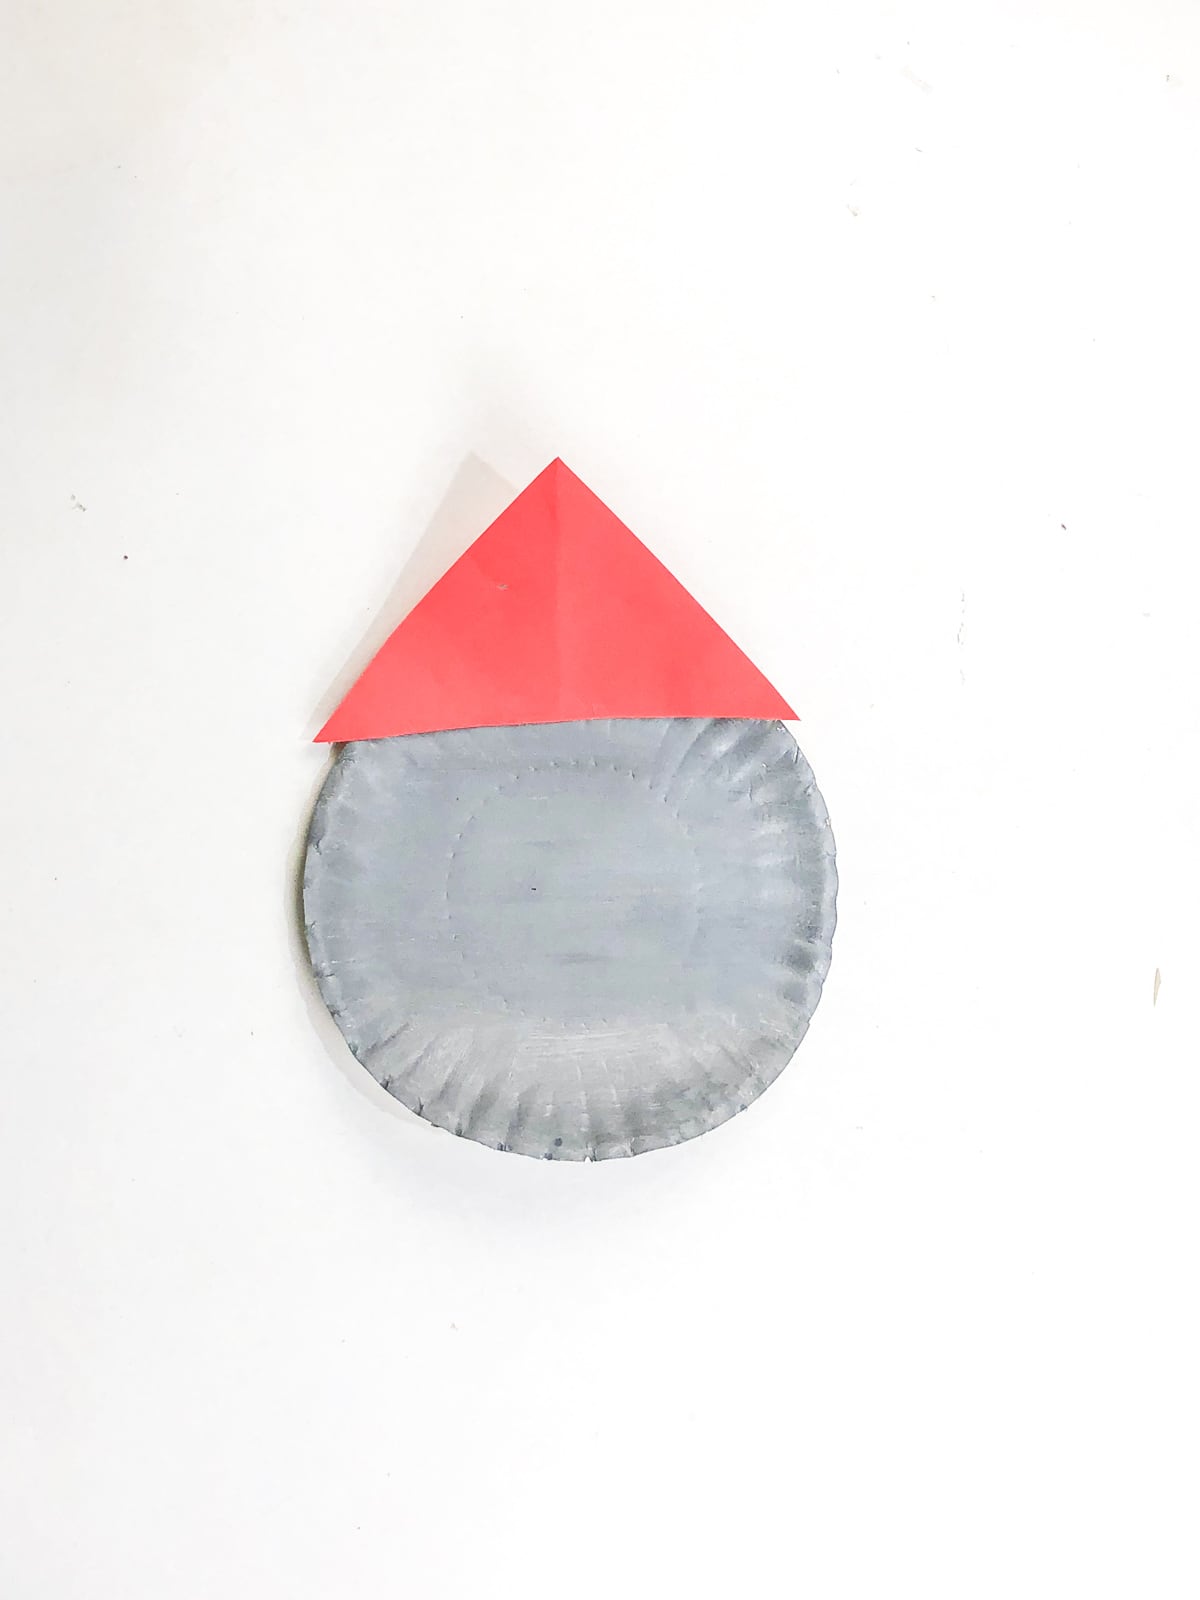 glue triangle to top of paper plate